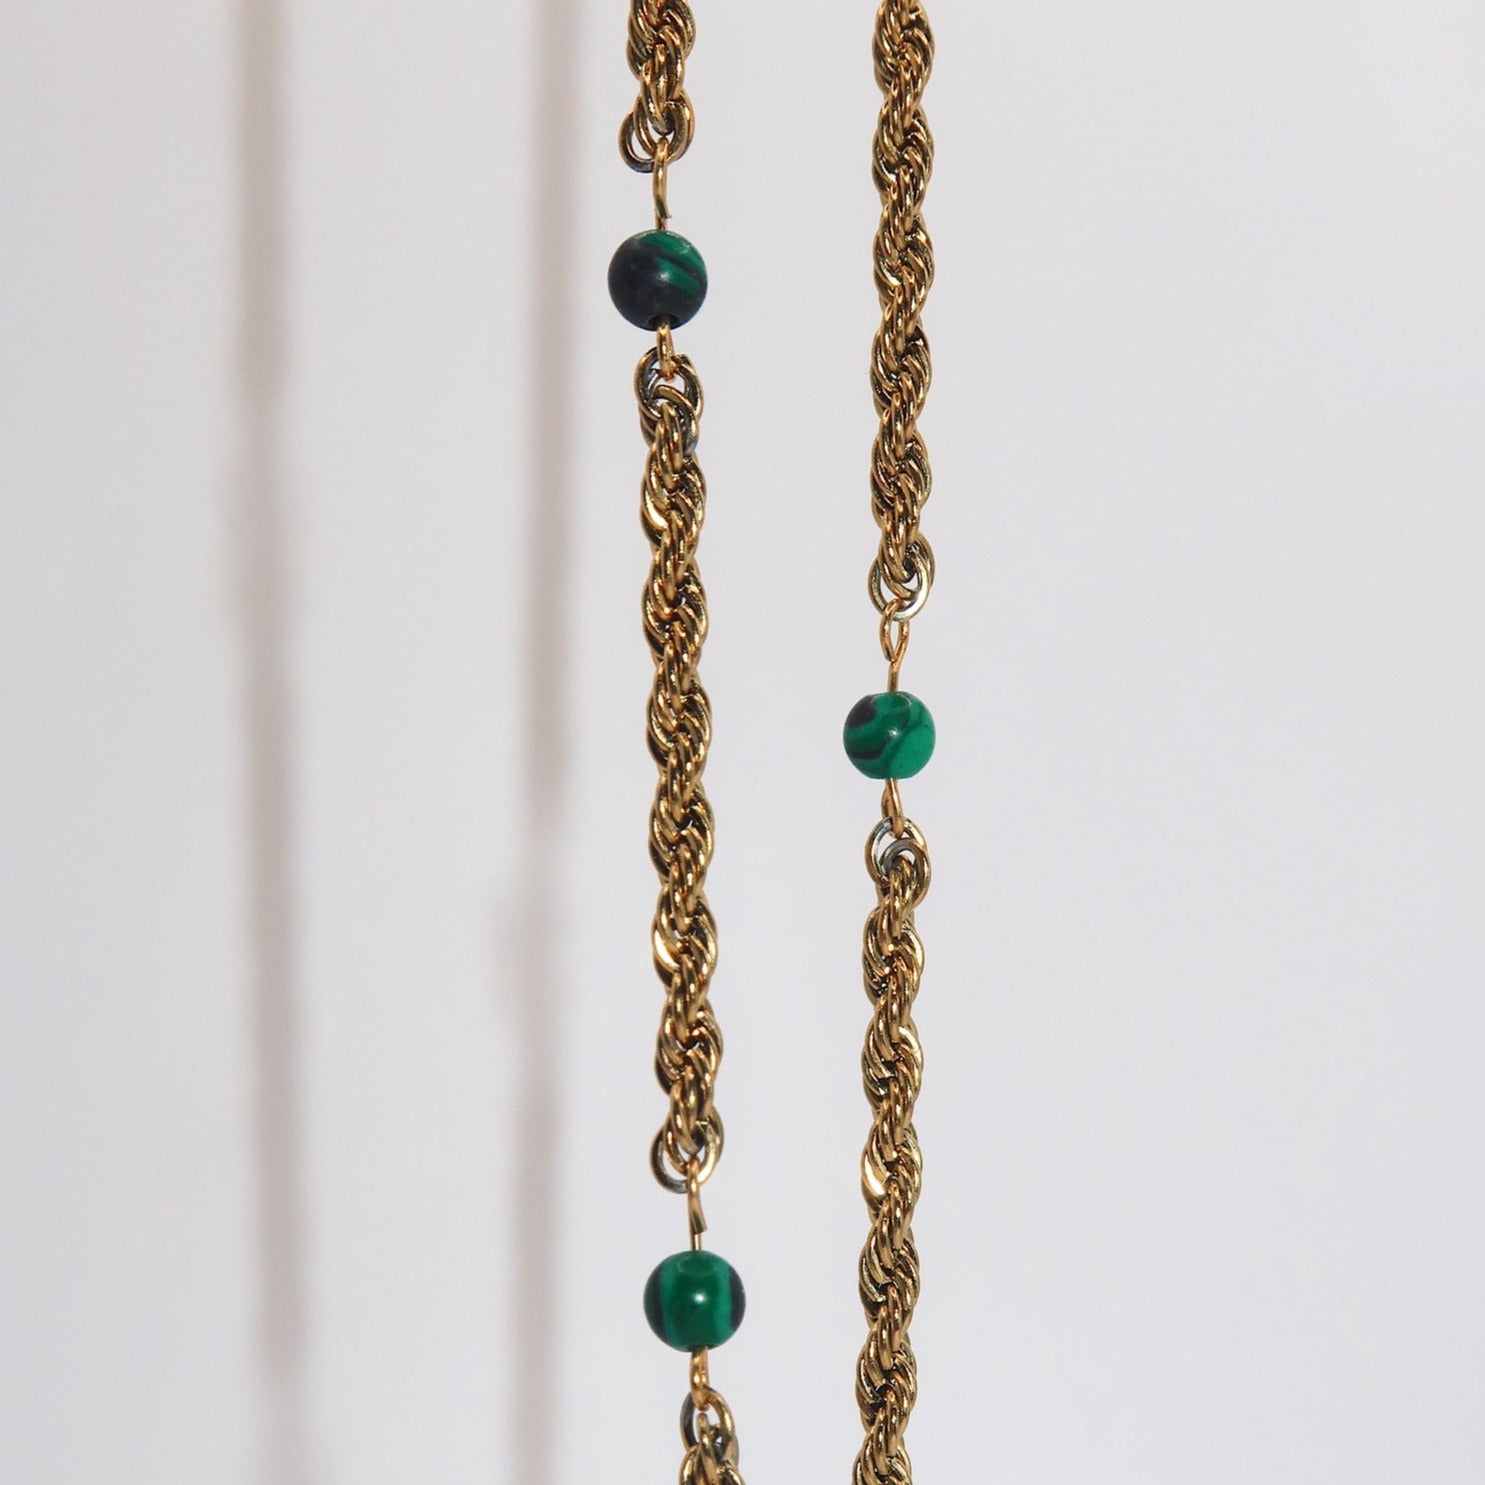 KRYSTAL - 18K PVD Gold Plated Necklace with Green Bead Detail - Mixed Metals